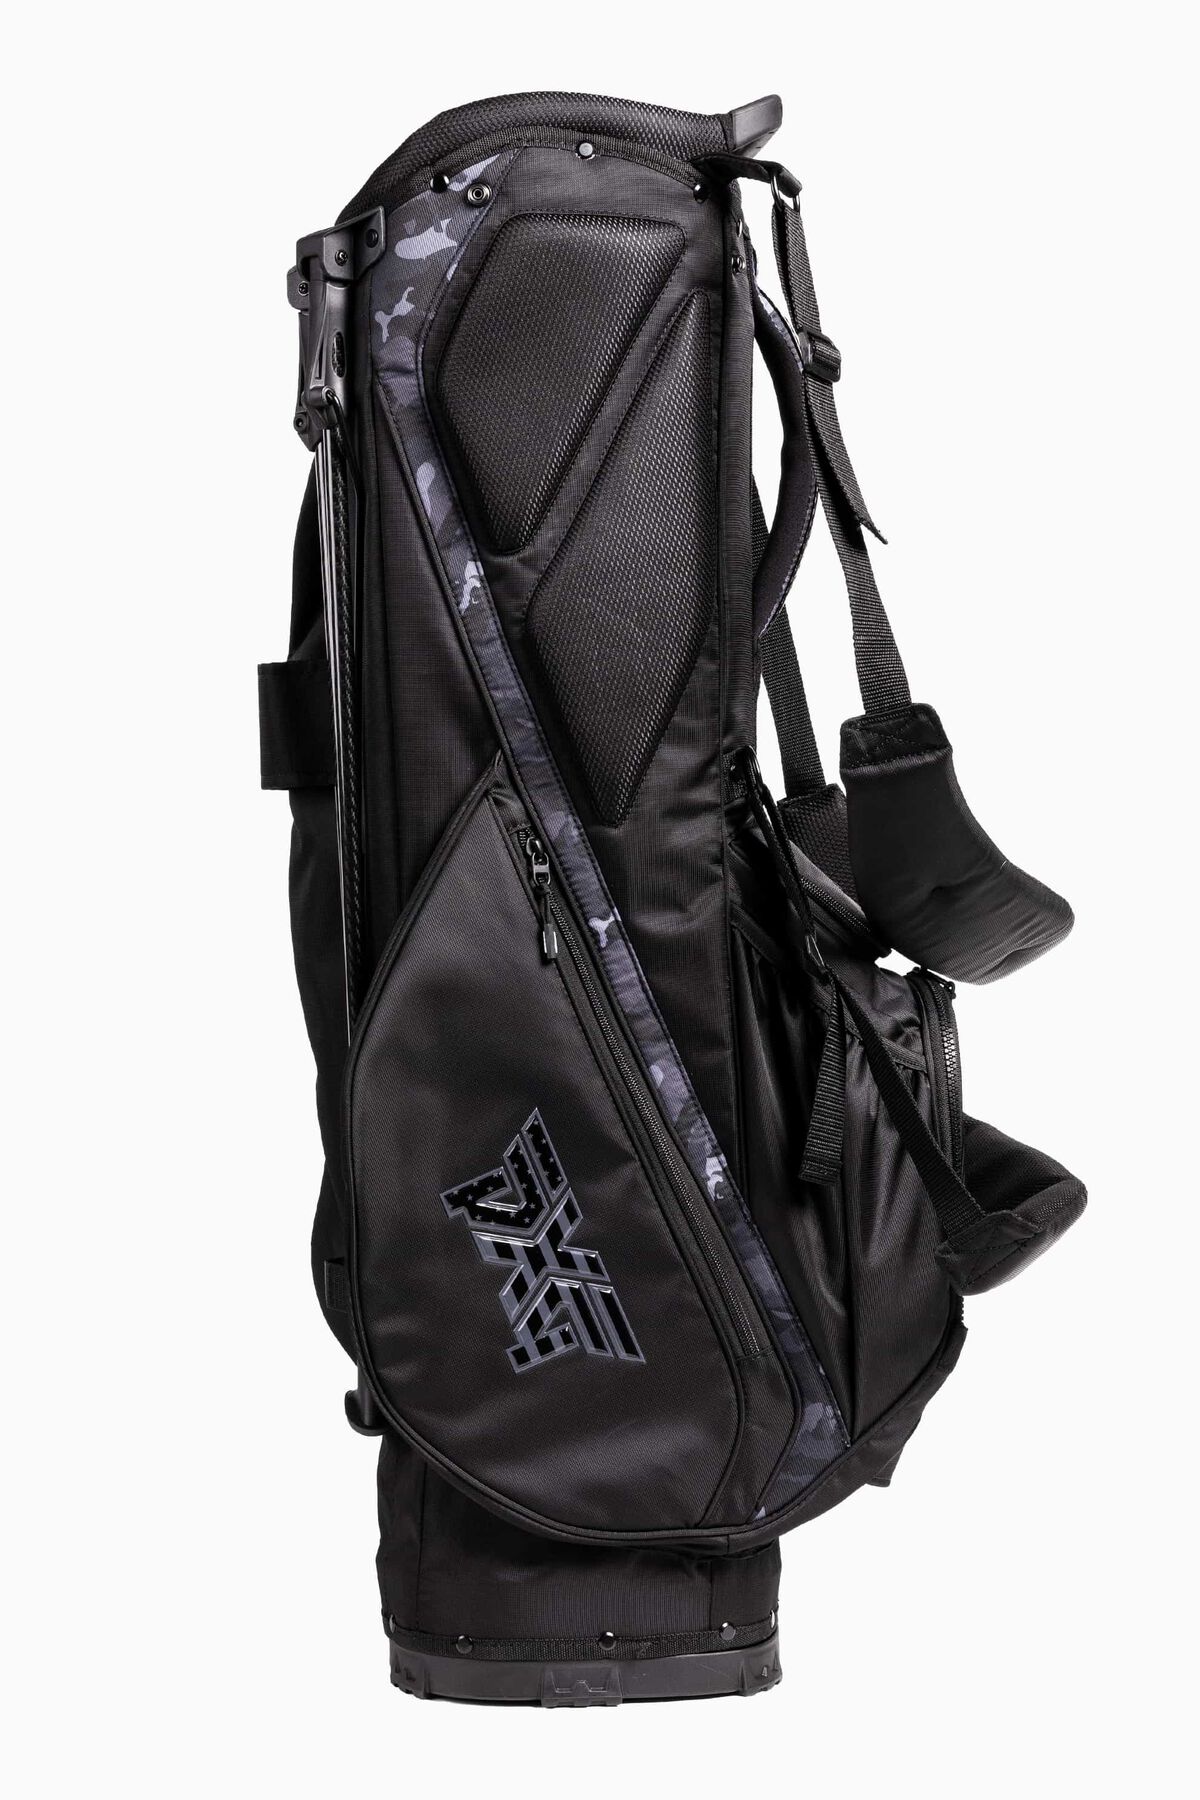 Freedom Collection Lightweight Carry Stand Bag Black